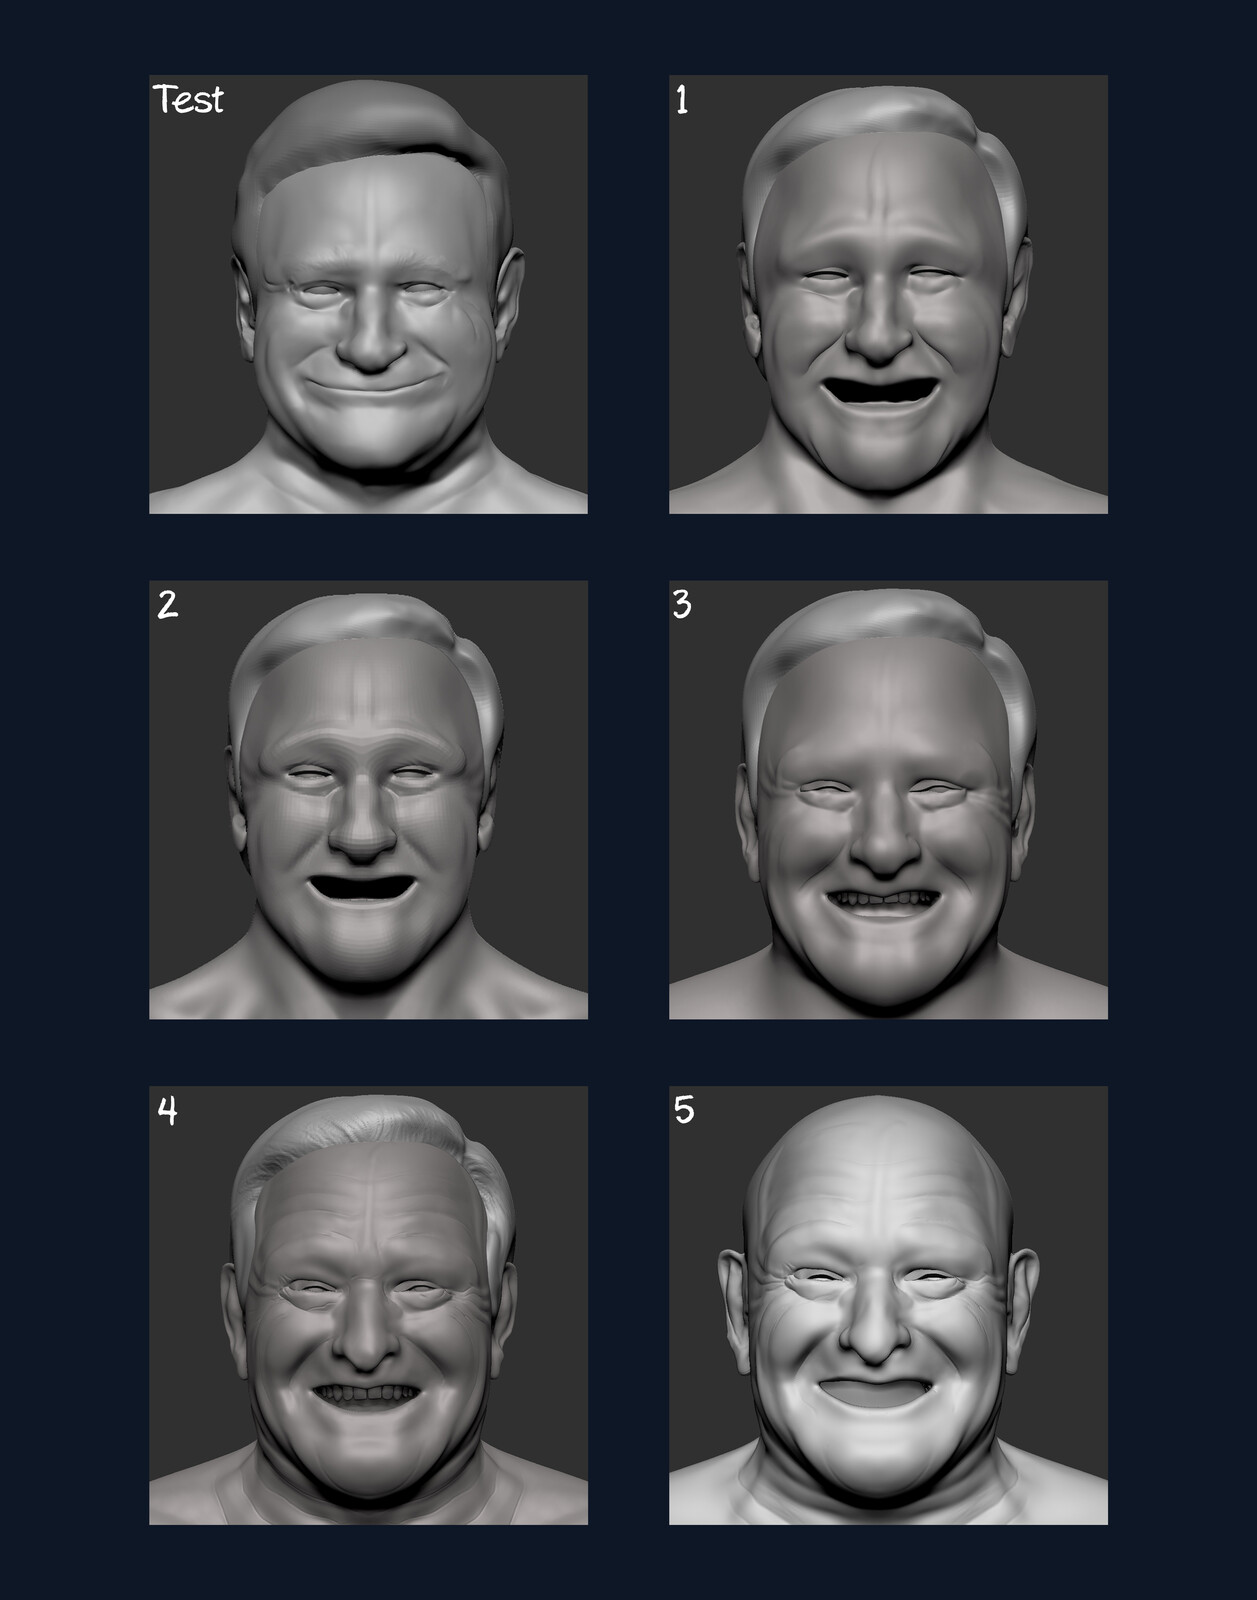 progression of faces (I didnt save as many as I would have liked)